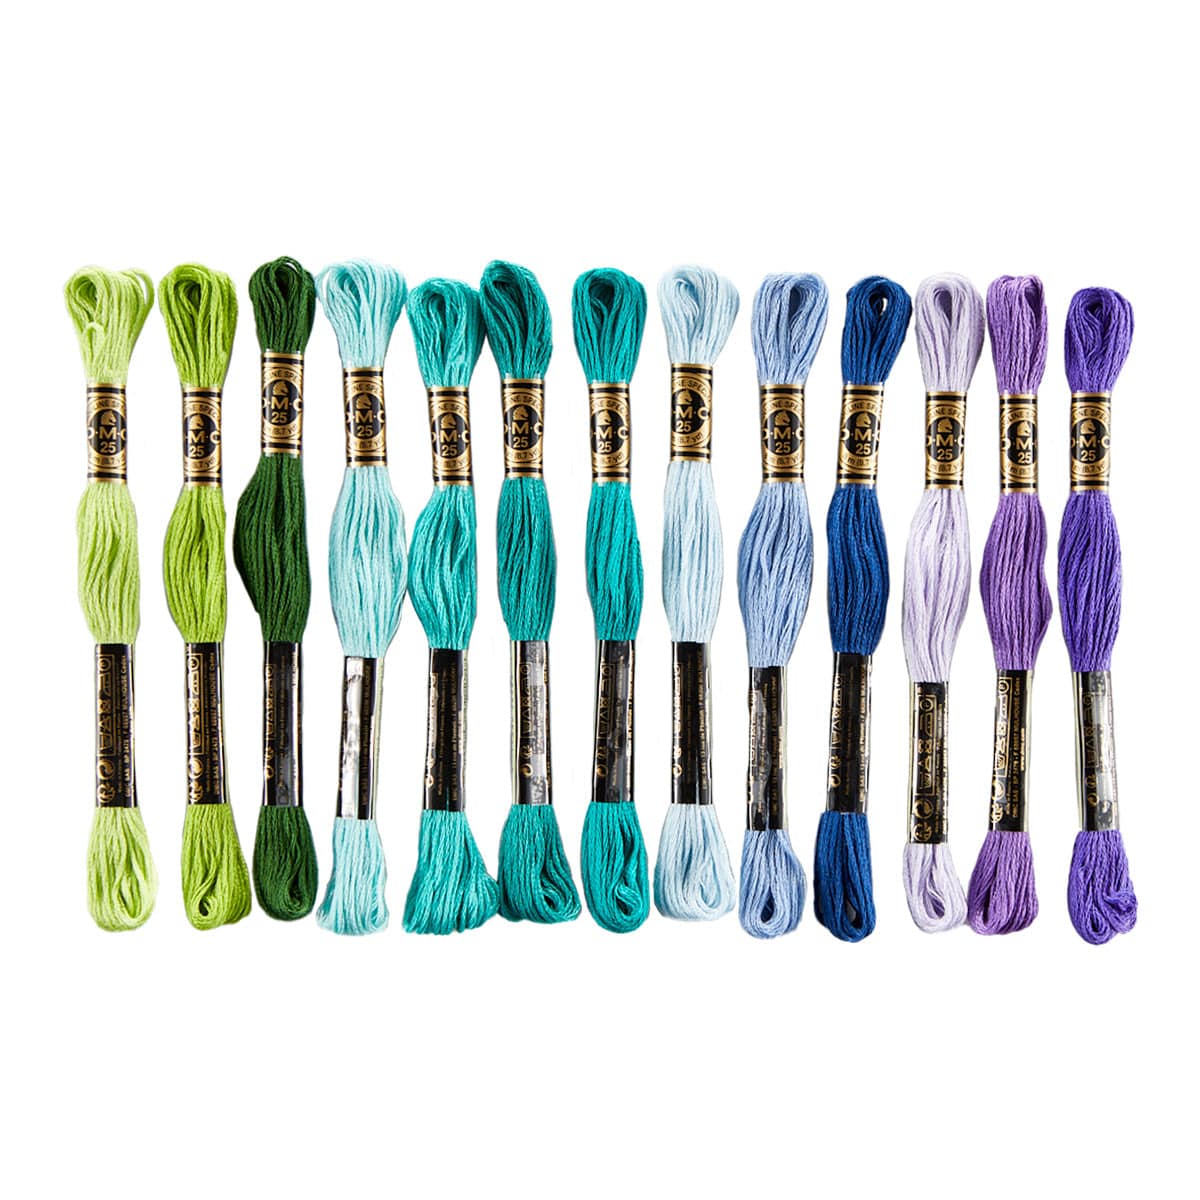 DMC Color Variations Pick Your Colors Embroidery Floss 1 Skein 4110 Sunrise  for sale online